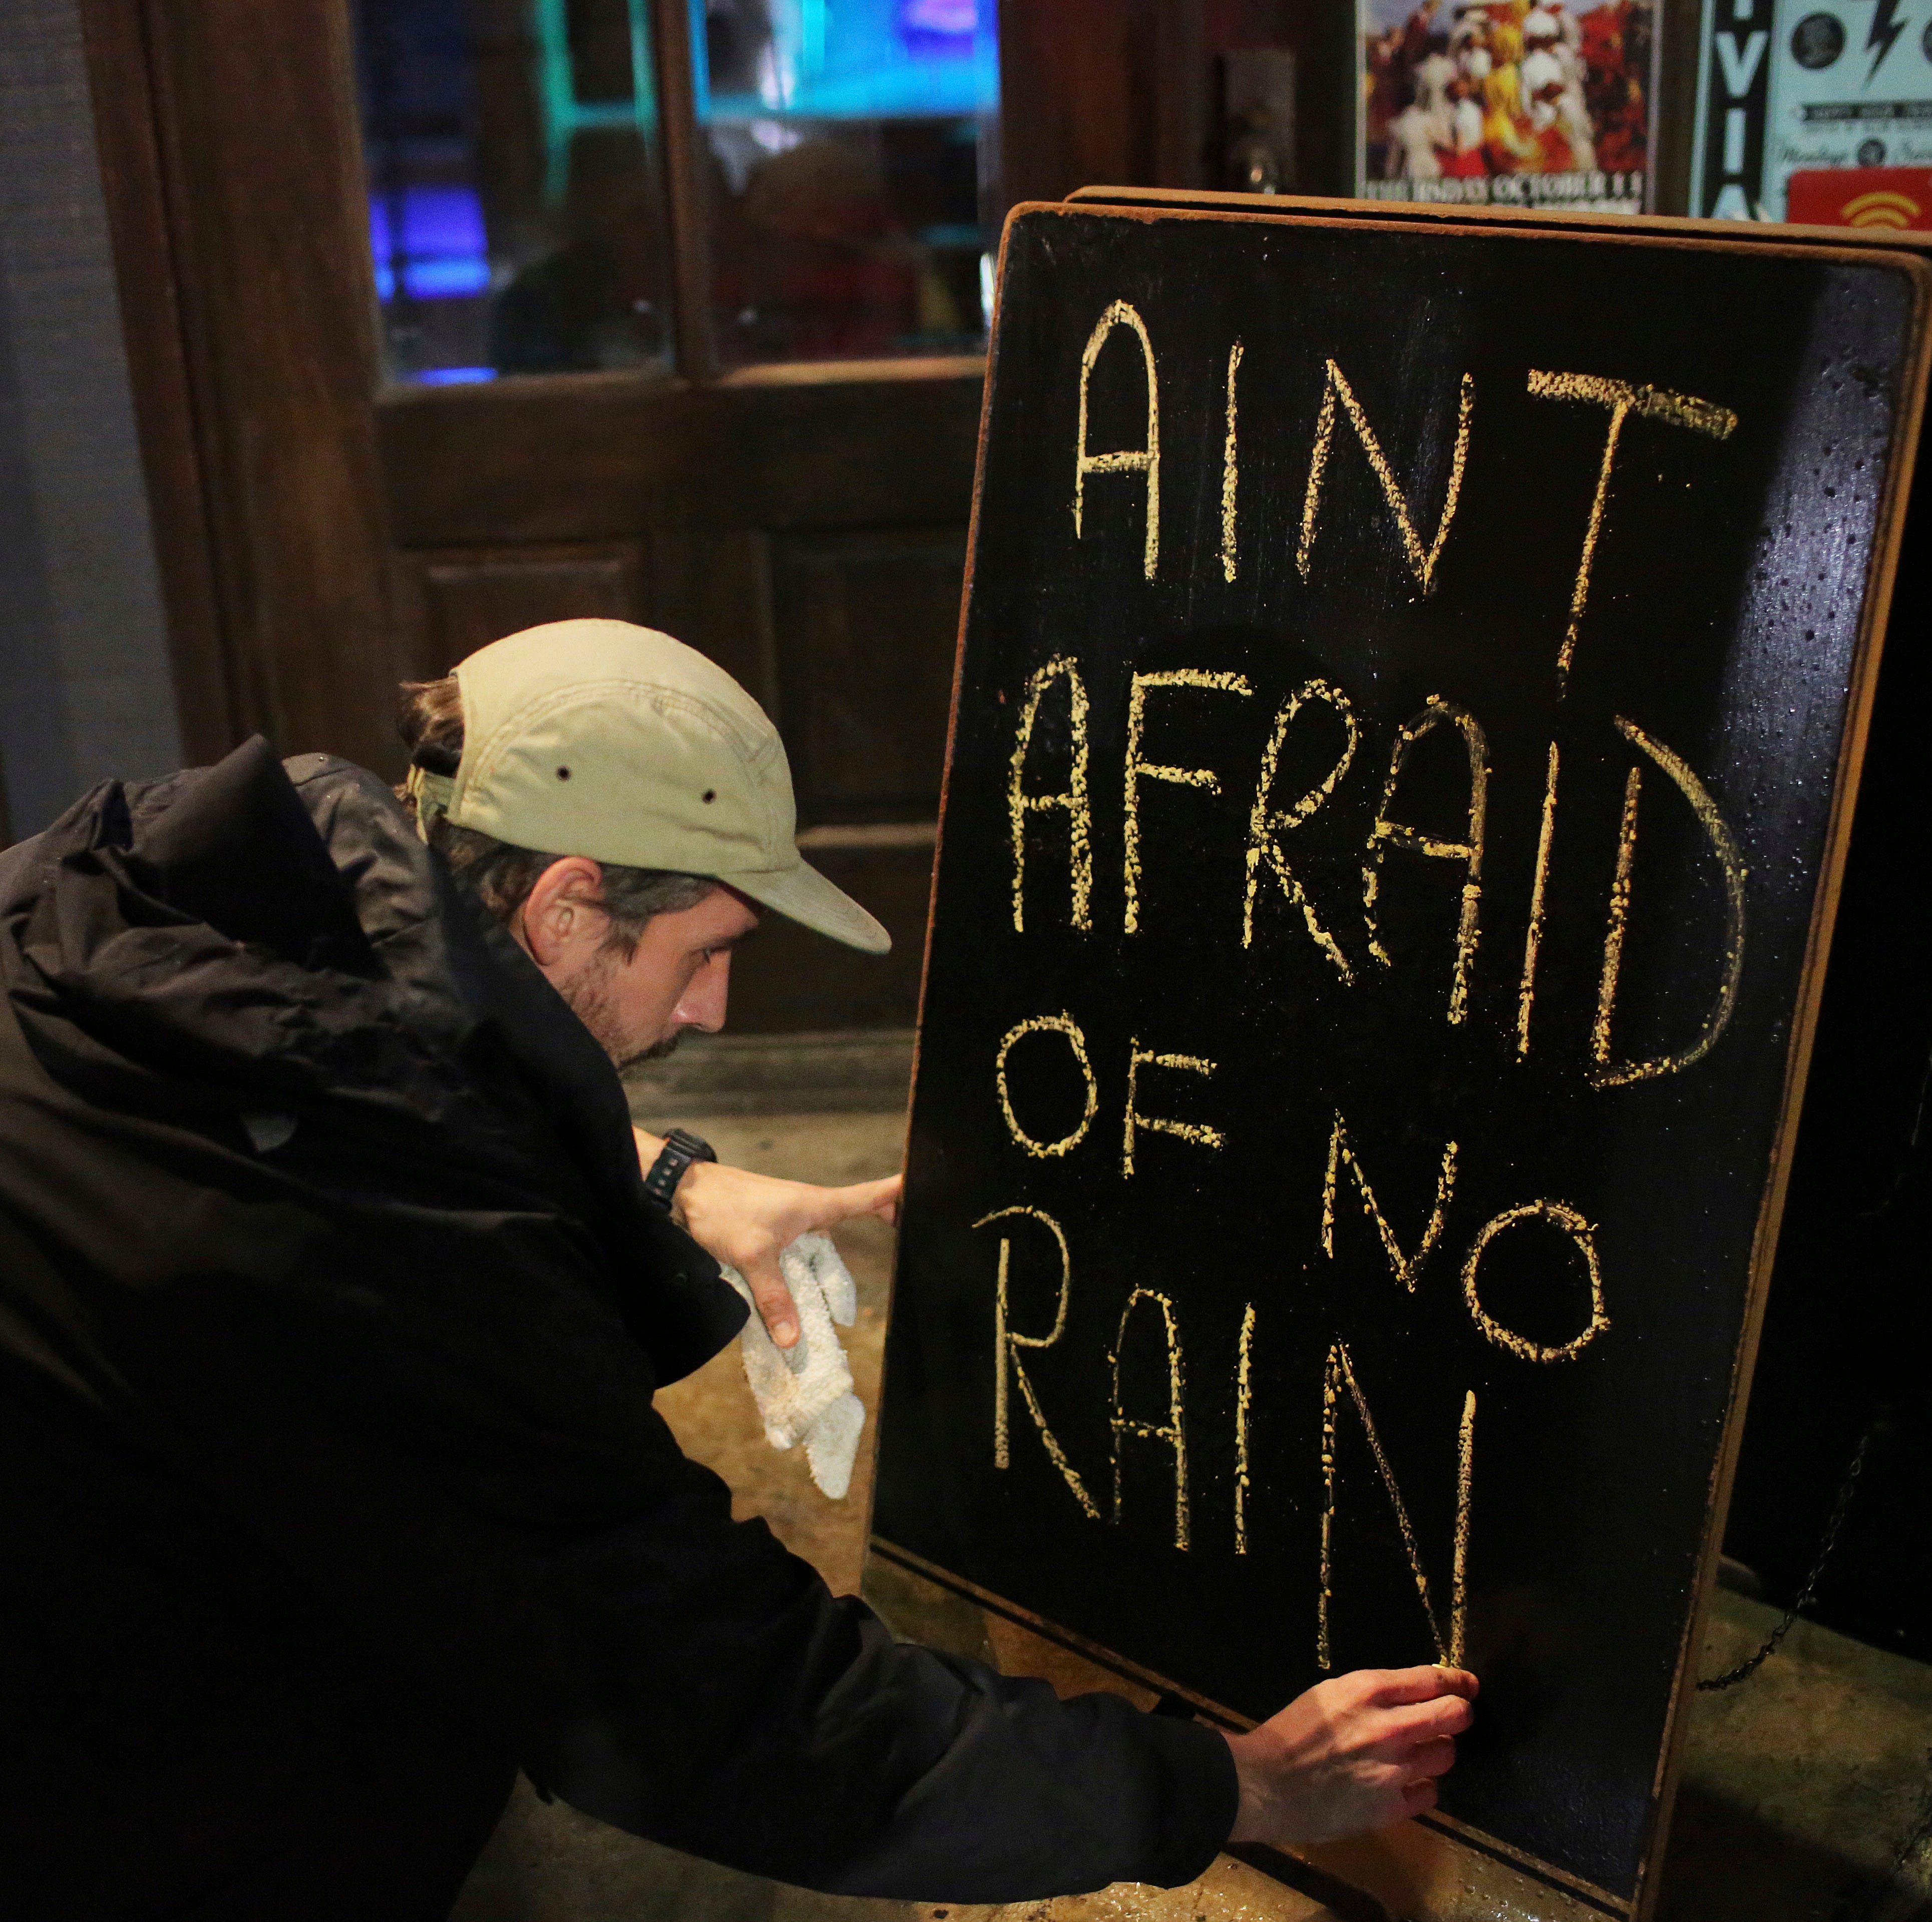 Nick Eberlein, bartender at The Merry Widow, draws a new sign as Tropical Storm Gordon arrives at night on Tuesday, Sept. 4, 2018 in Mobile, Ala. Tropical-force winds from fast-moving Gordon smashed into the coastline of Alabama and the western Flori